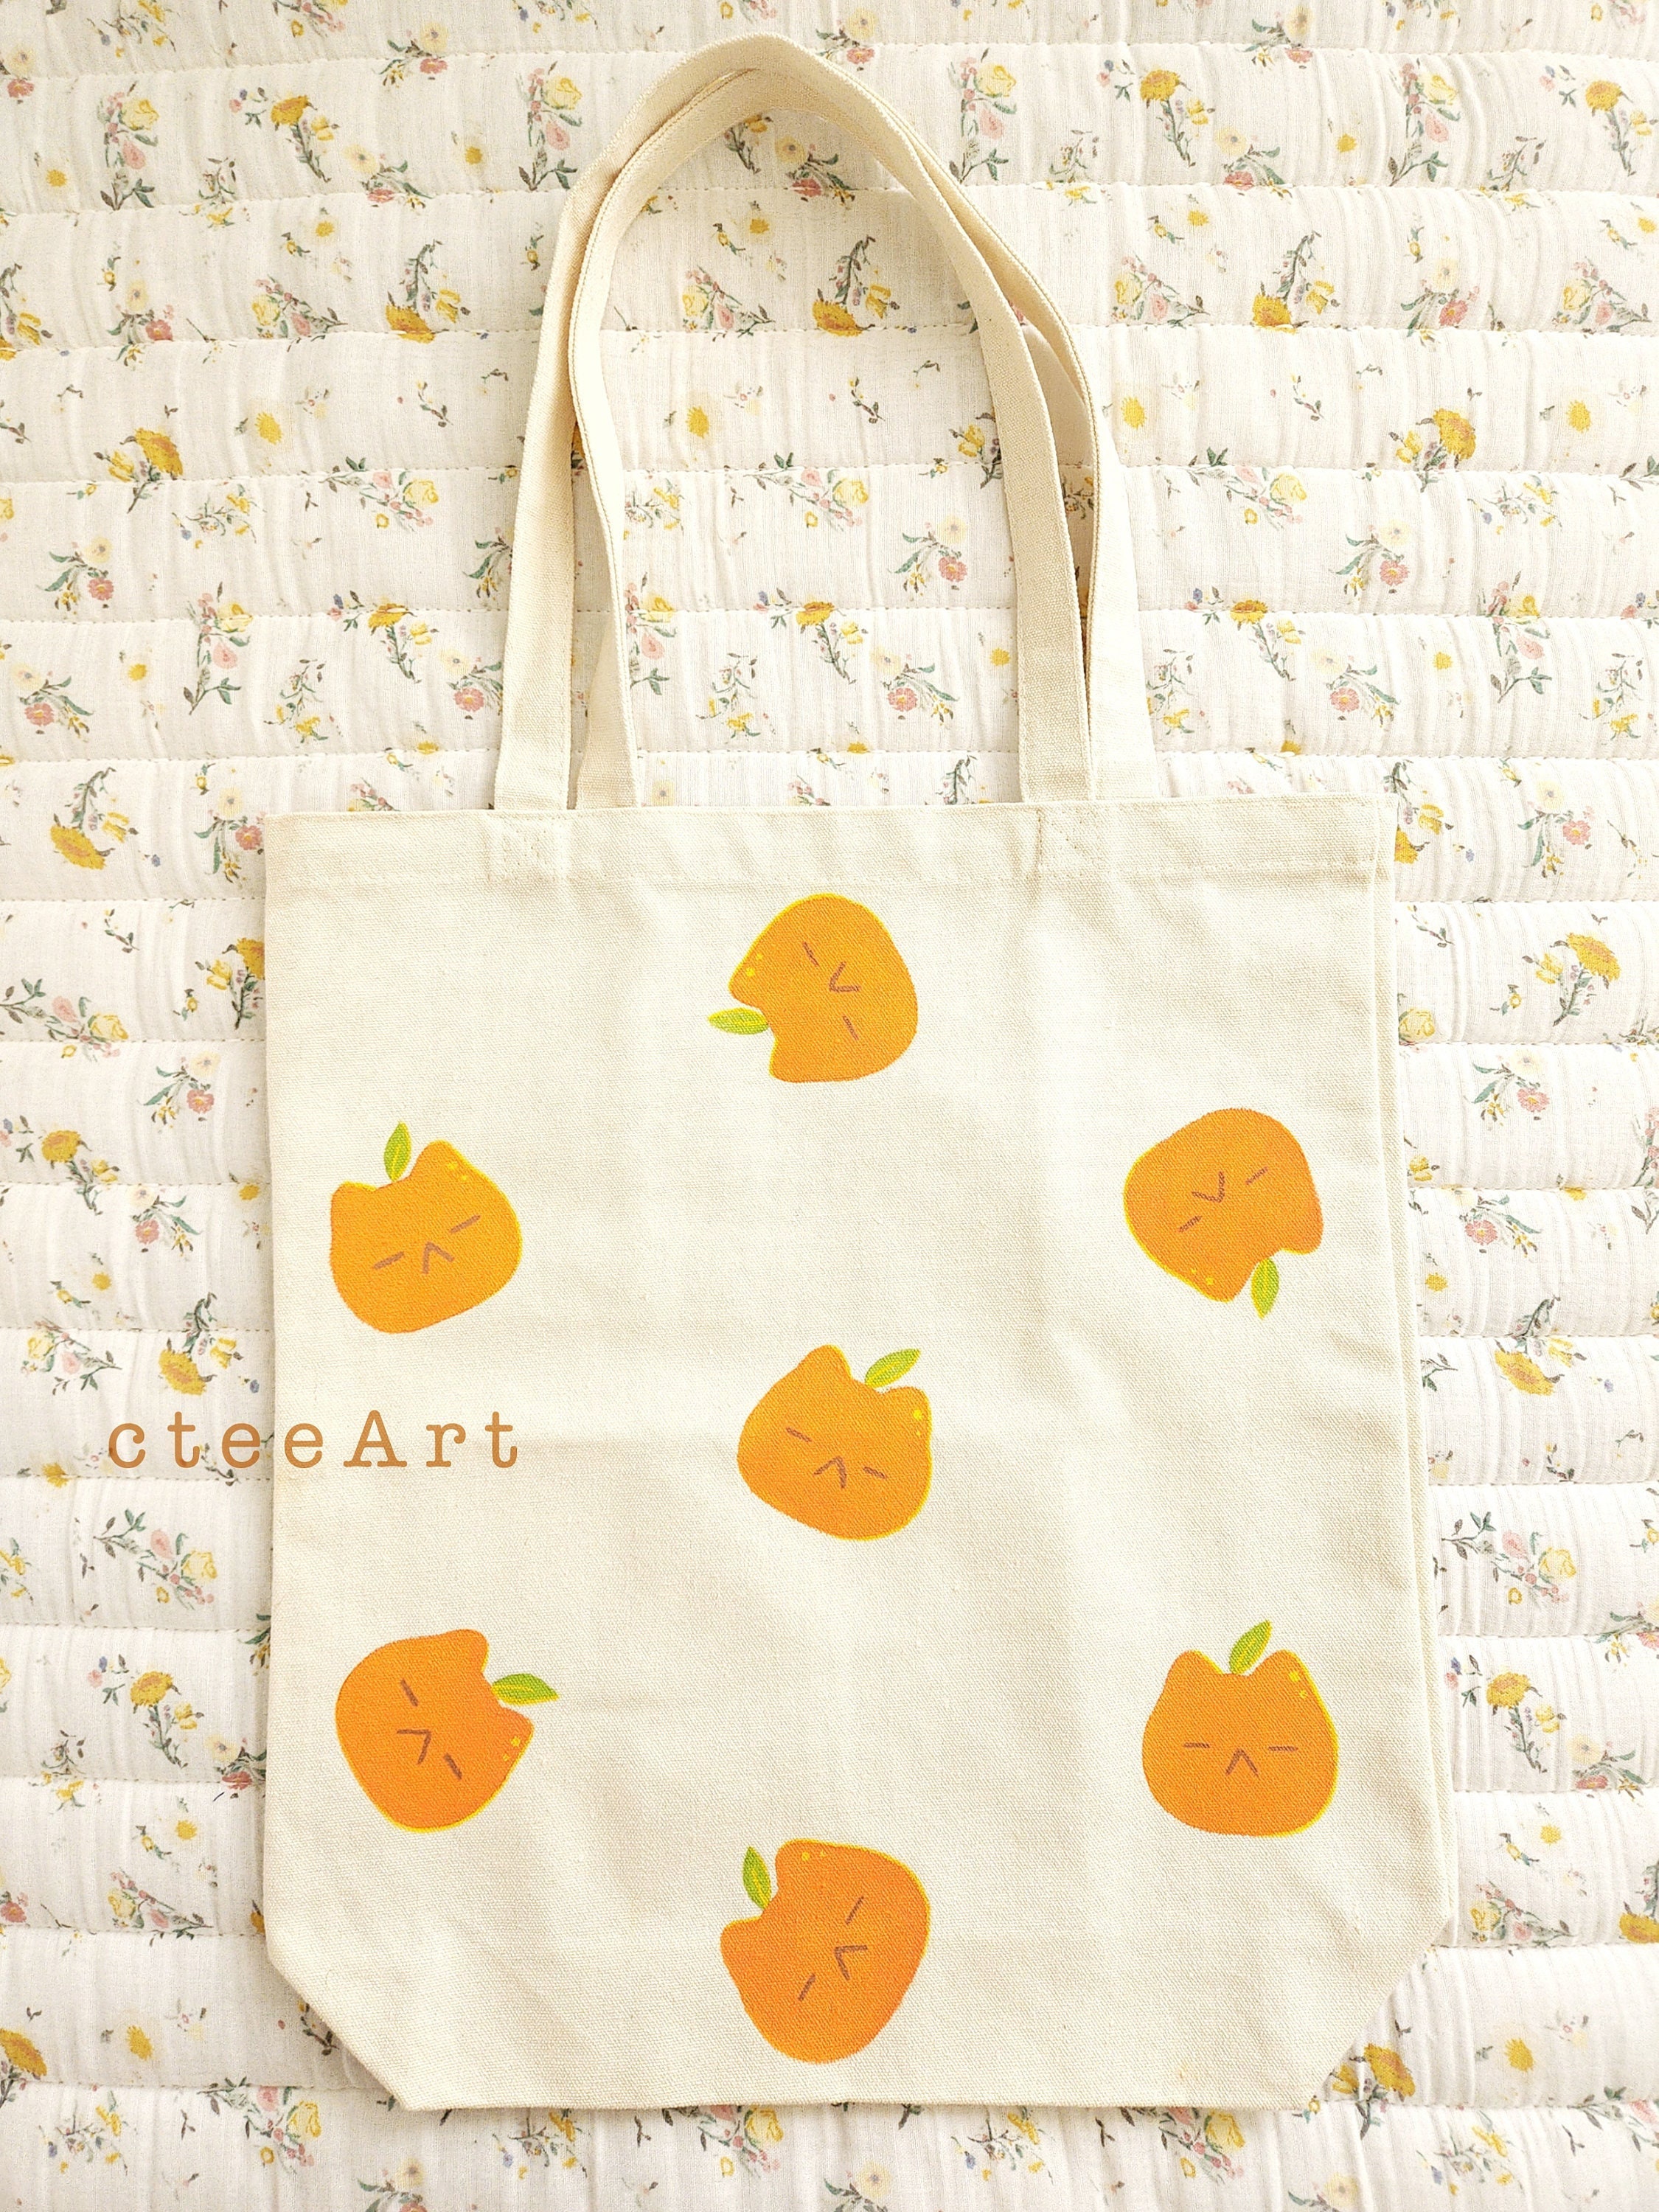 Fresh tangerine Tote Bag for Sale by 6hands